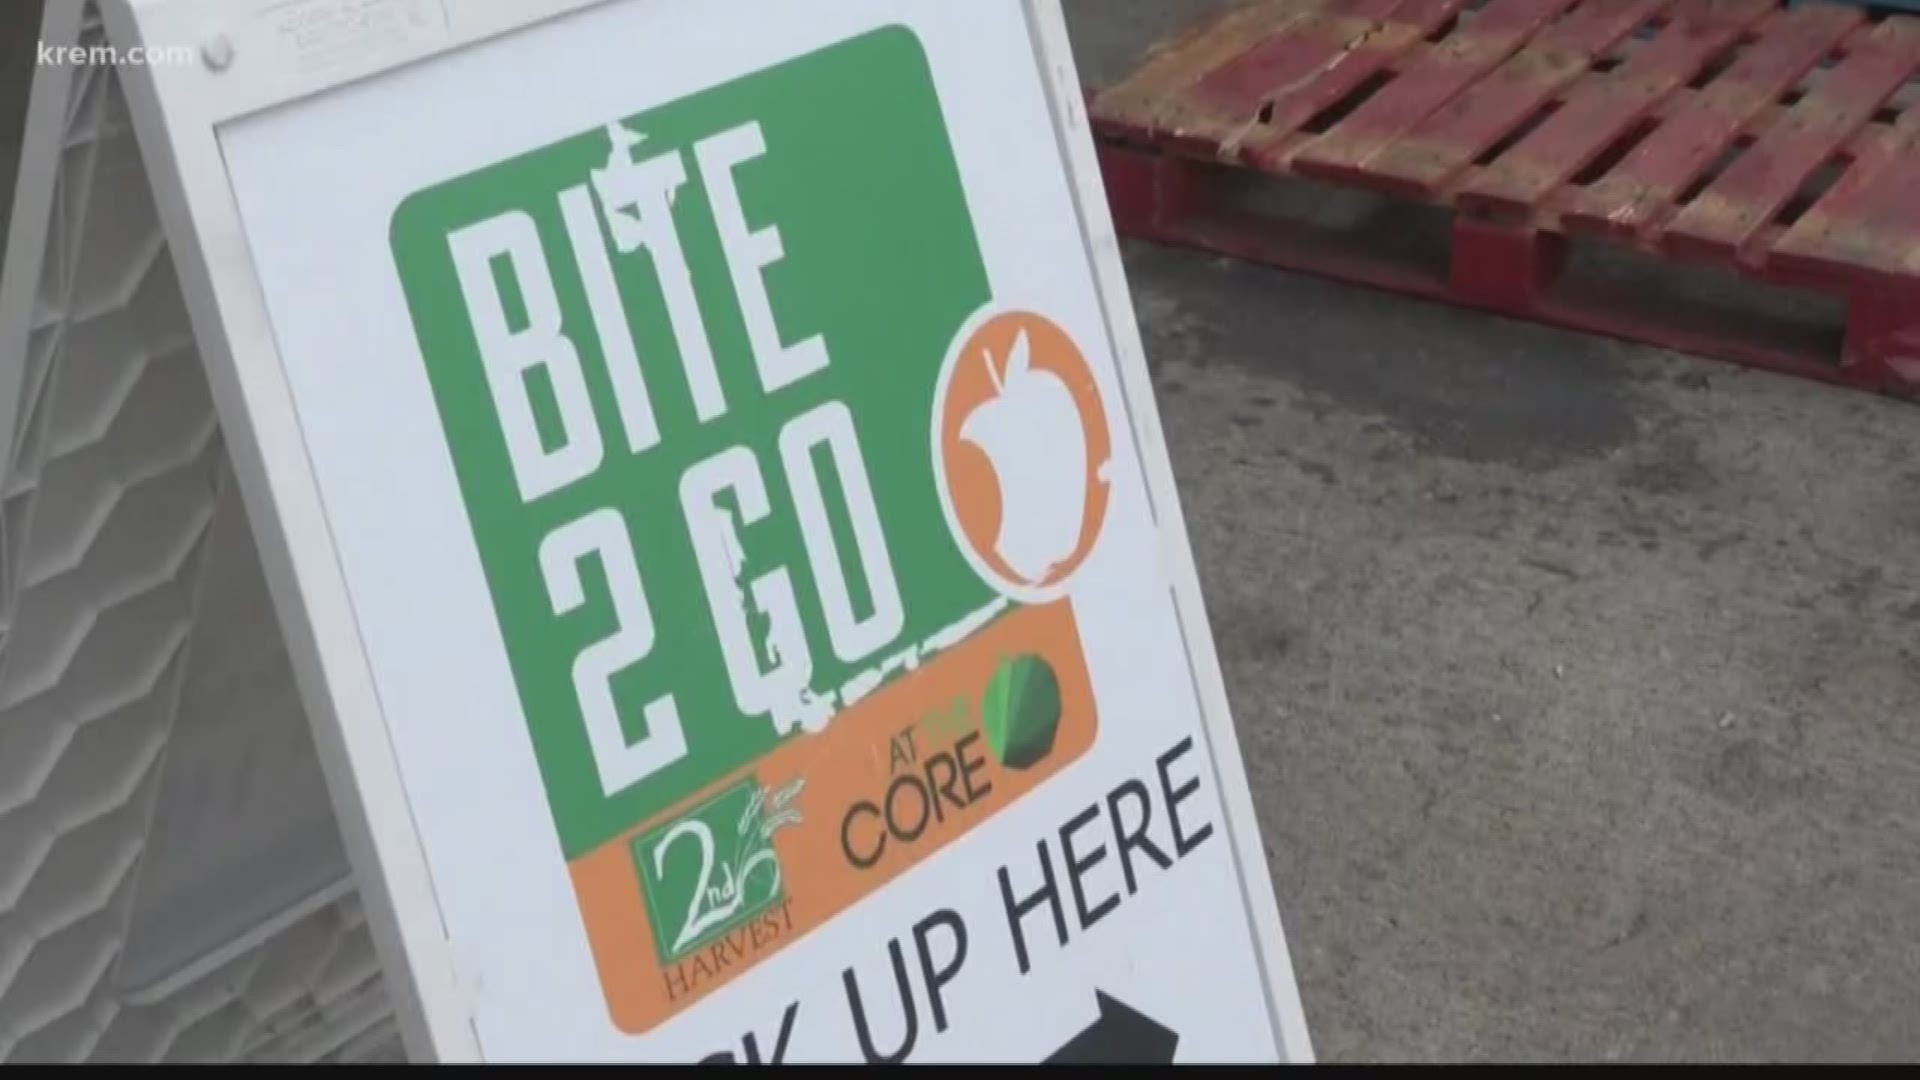 Thousands of children right here in Spokane don't have a steady source of meals on the weekends. A program called Bite 2 Go provides them with meals.